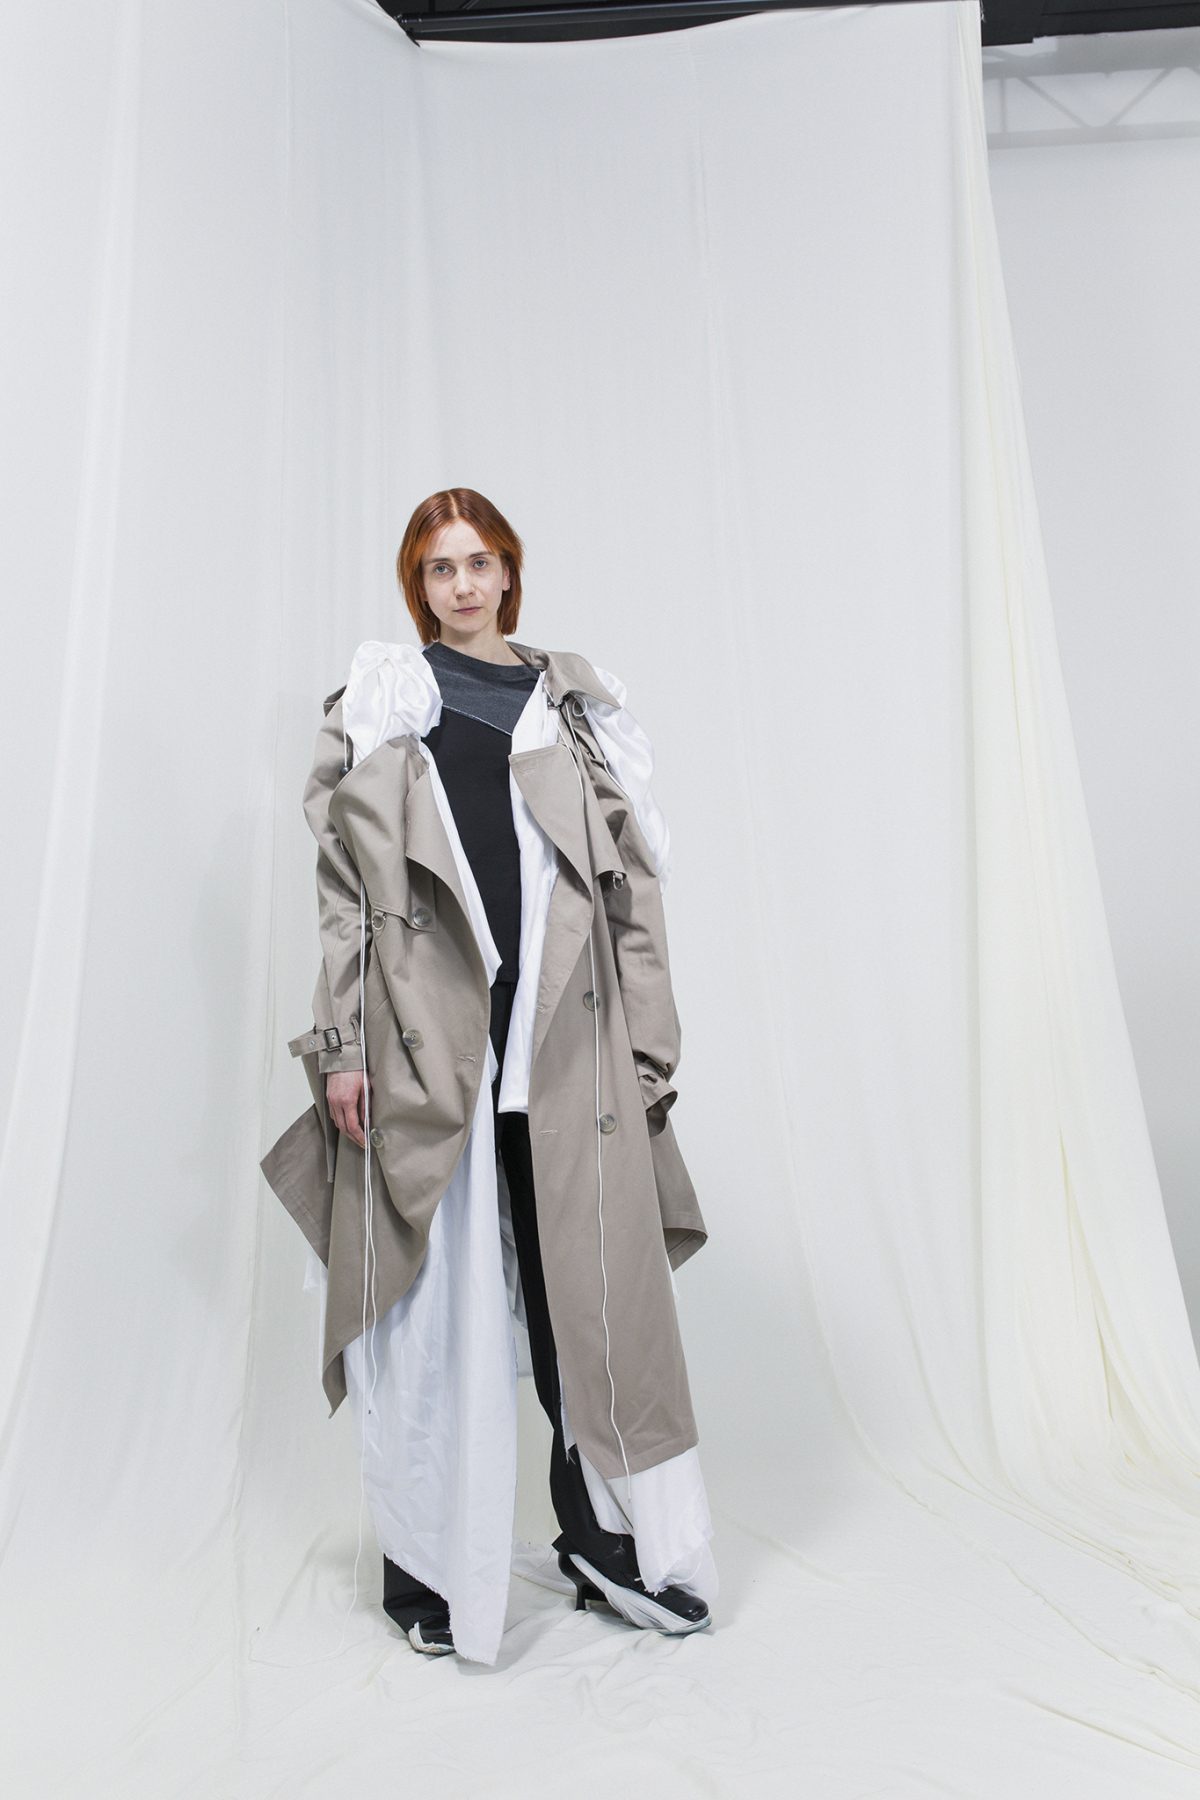 Model wearing a beige trench coat on top of a white robe, black trousers